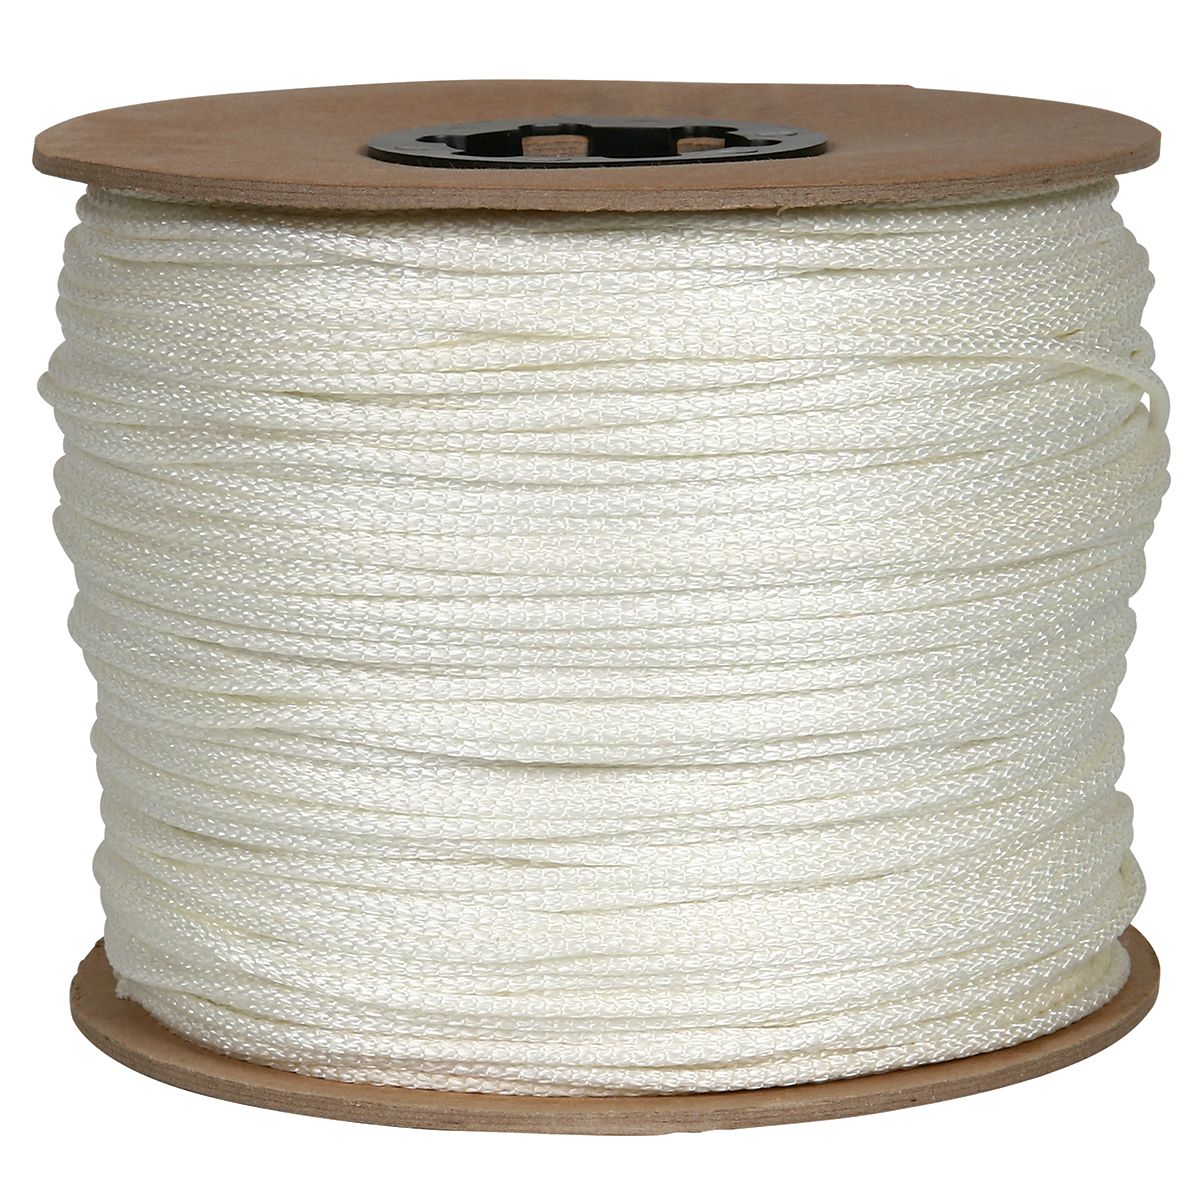 Solid Braid Polyester rope spool .White US made. 1/8" x 1000 ft High Quality 